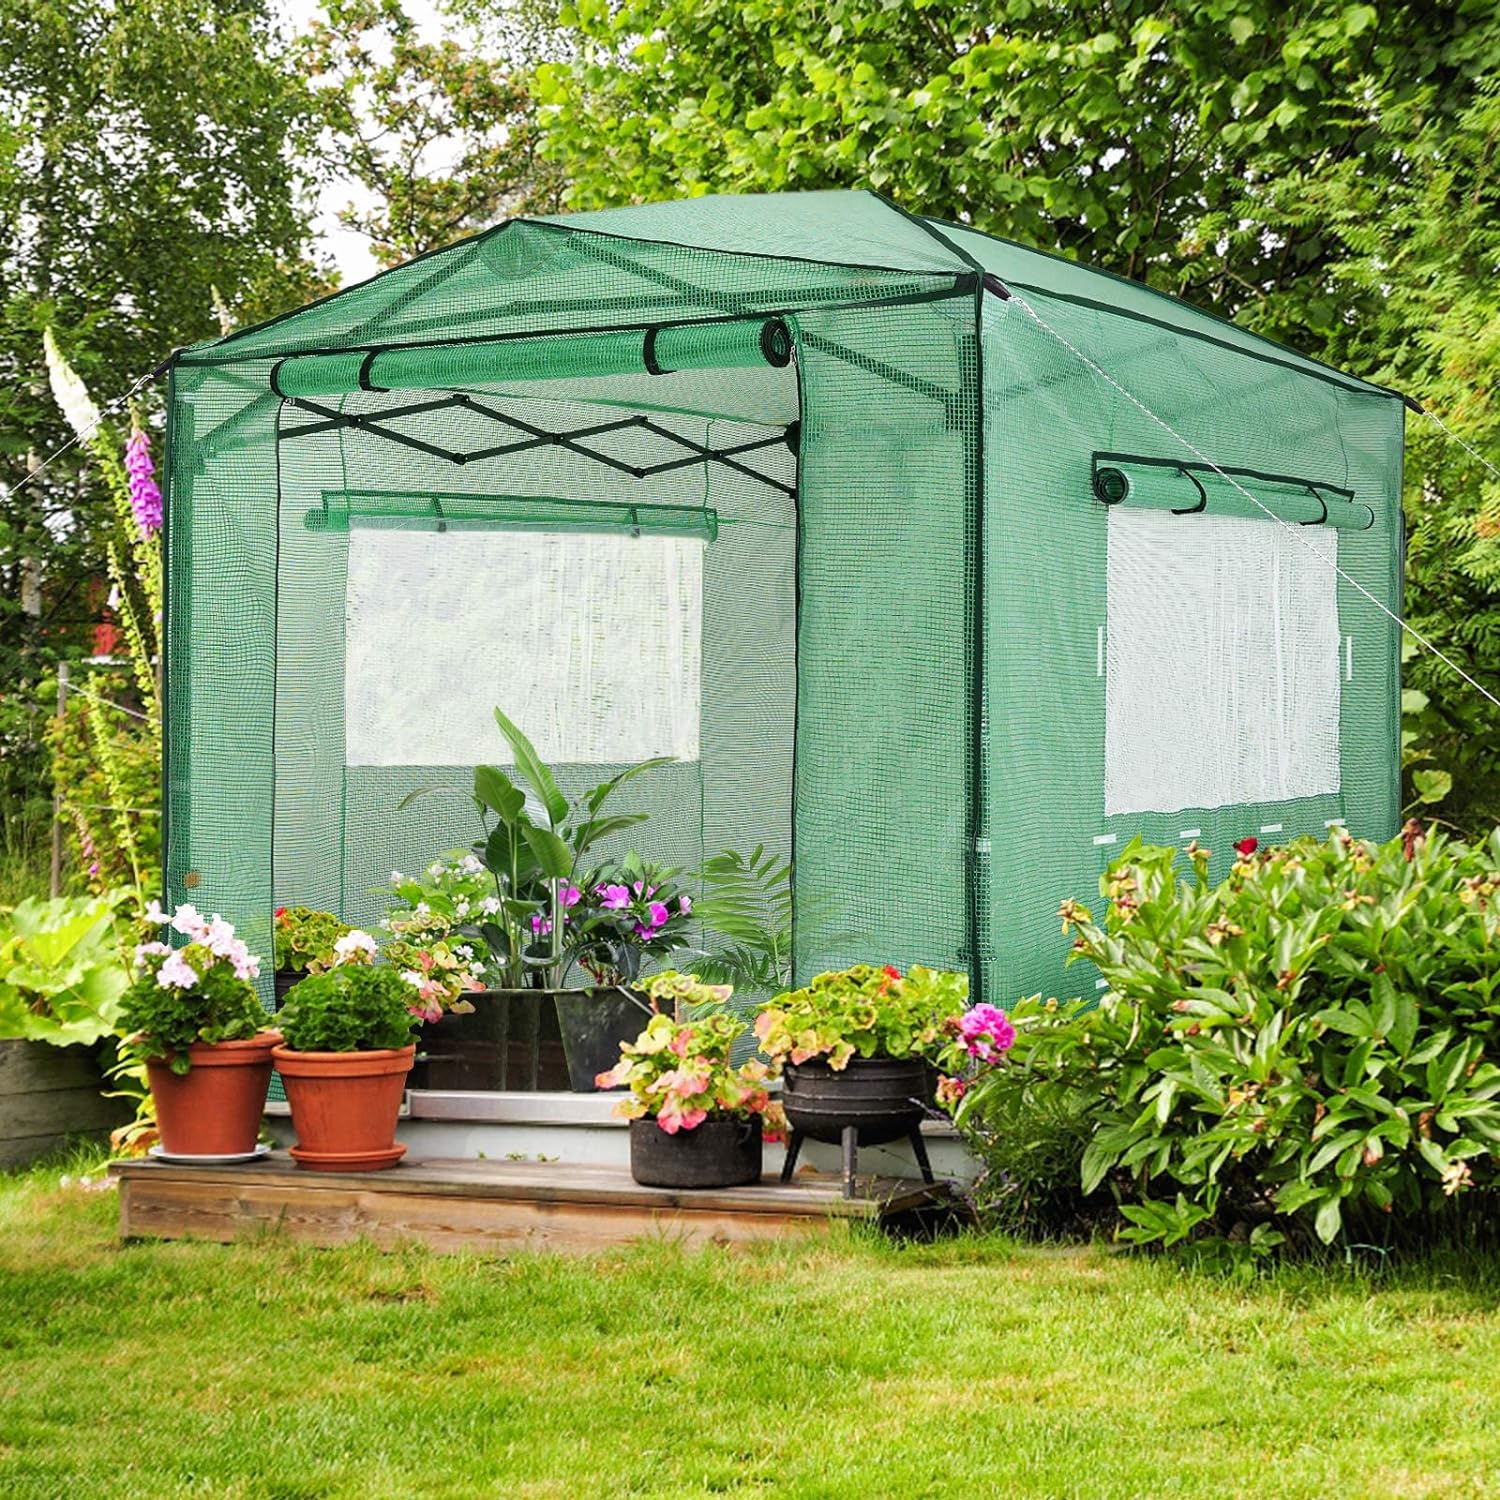 OUTFINE 8'x12' Portable Greenhouse Pop-up Greenhouse Gardening Canopy - $80